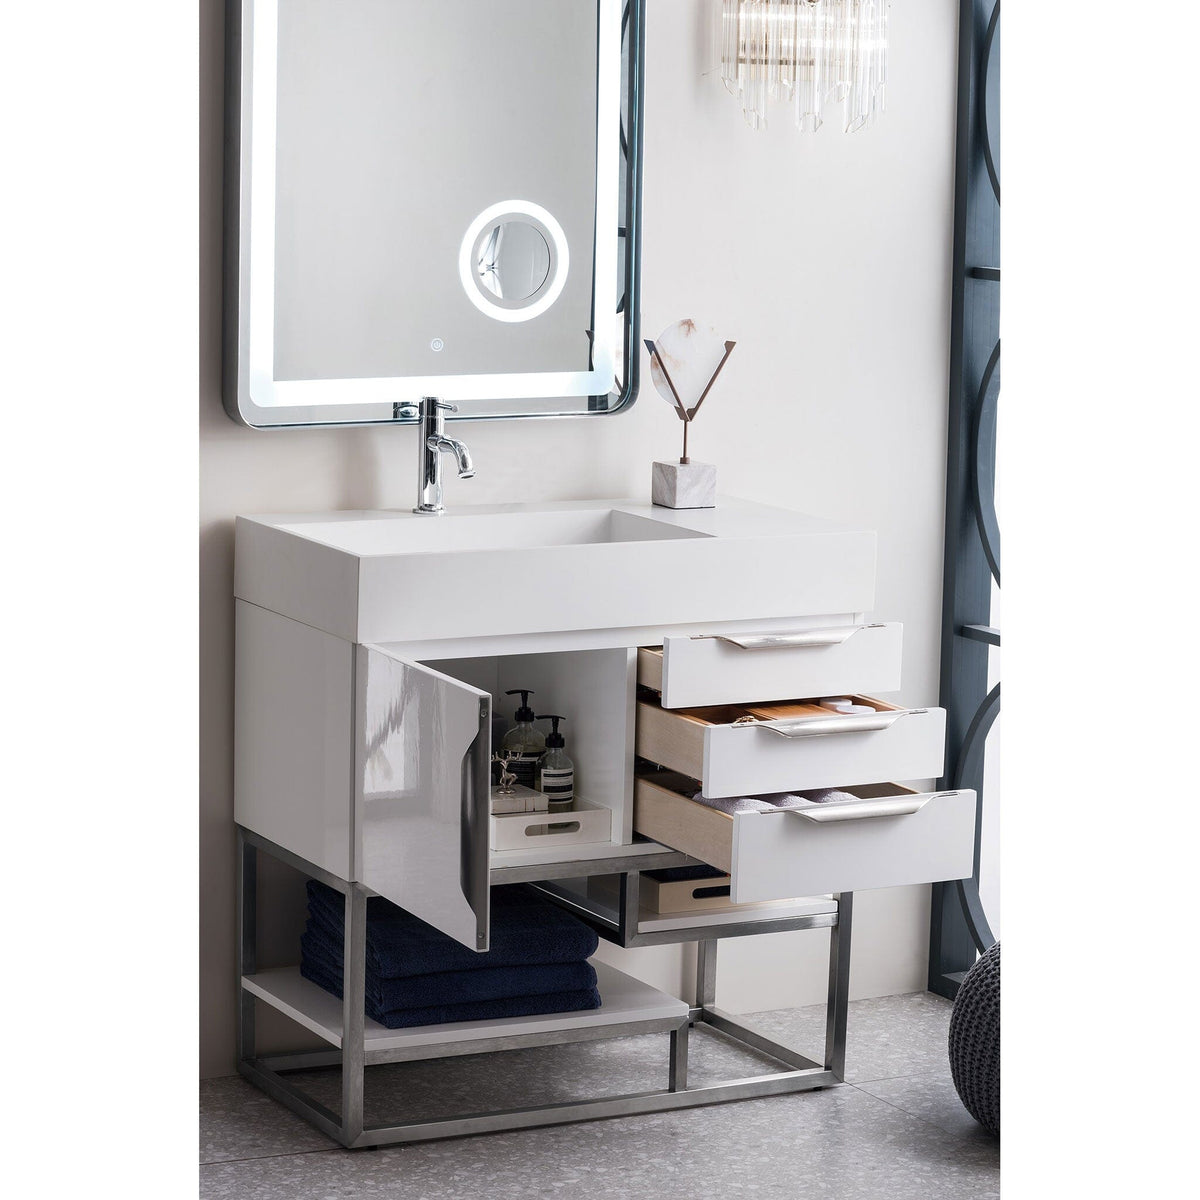 36" Columbia Single Bathroom Vanity, Glossy White w/ Brushed Nickel Base and Glossy White Composite Stone Top